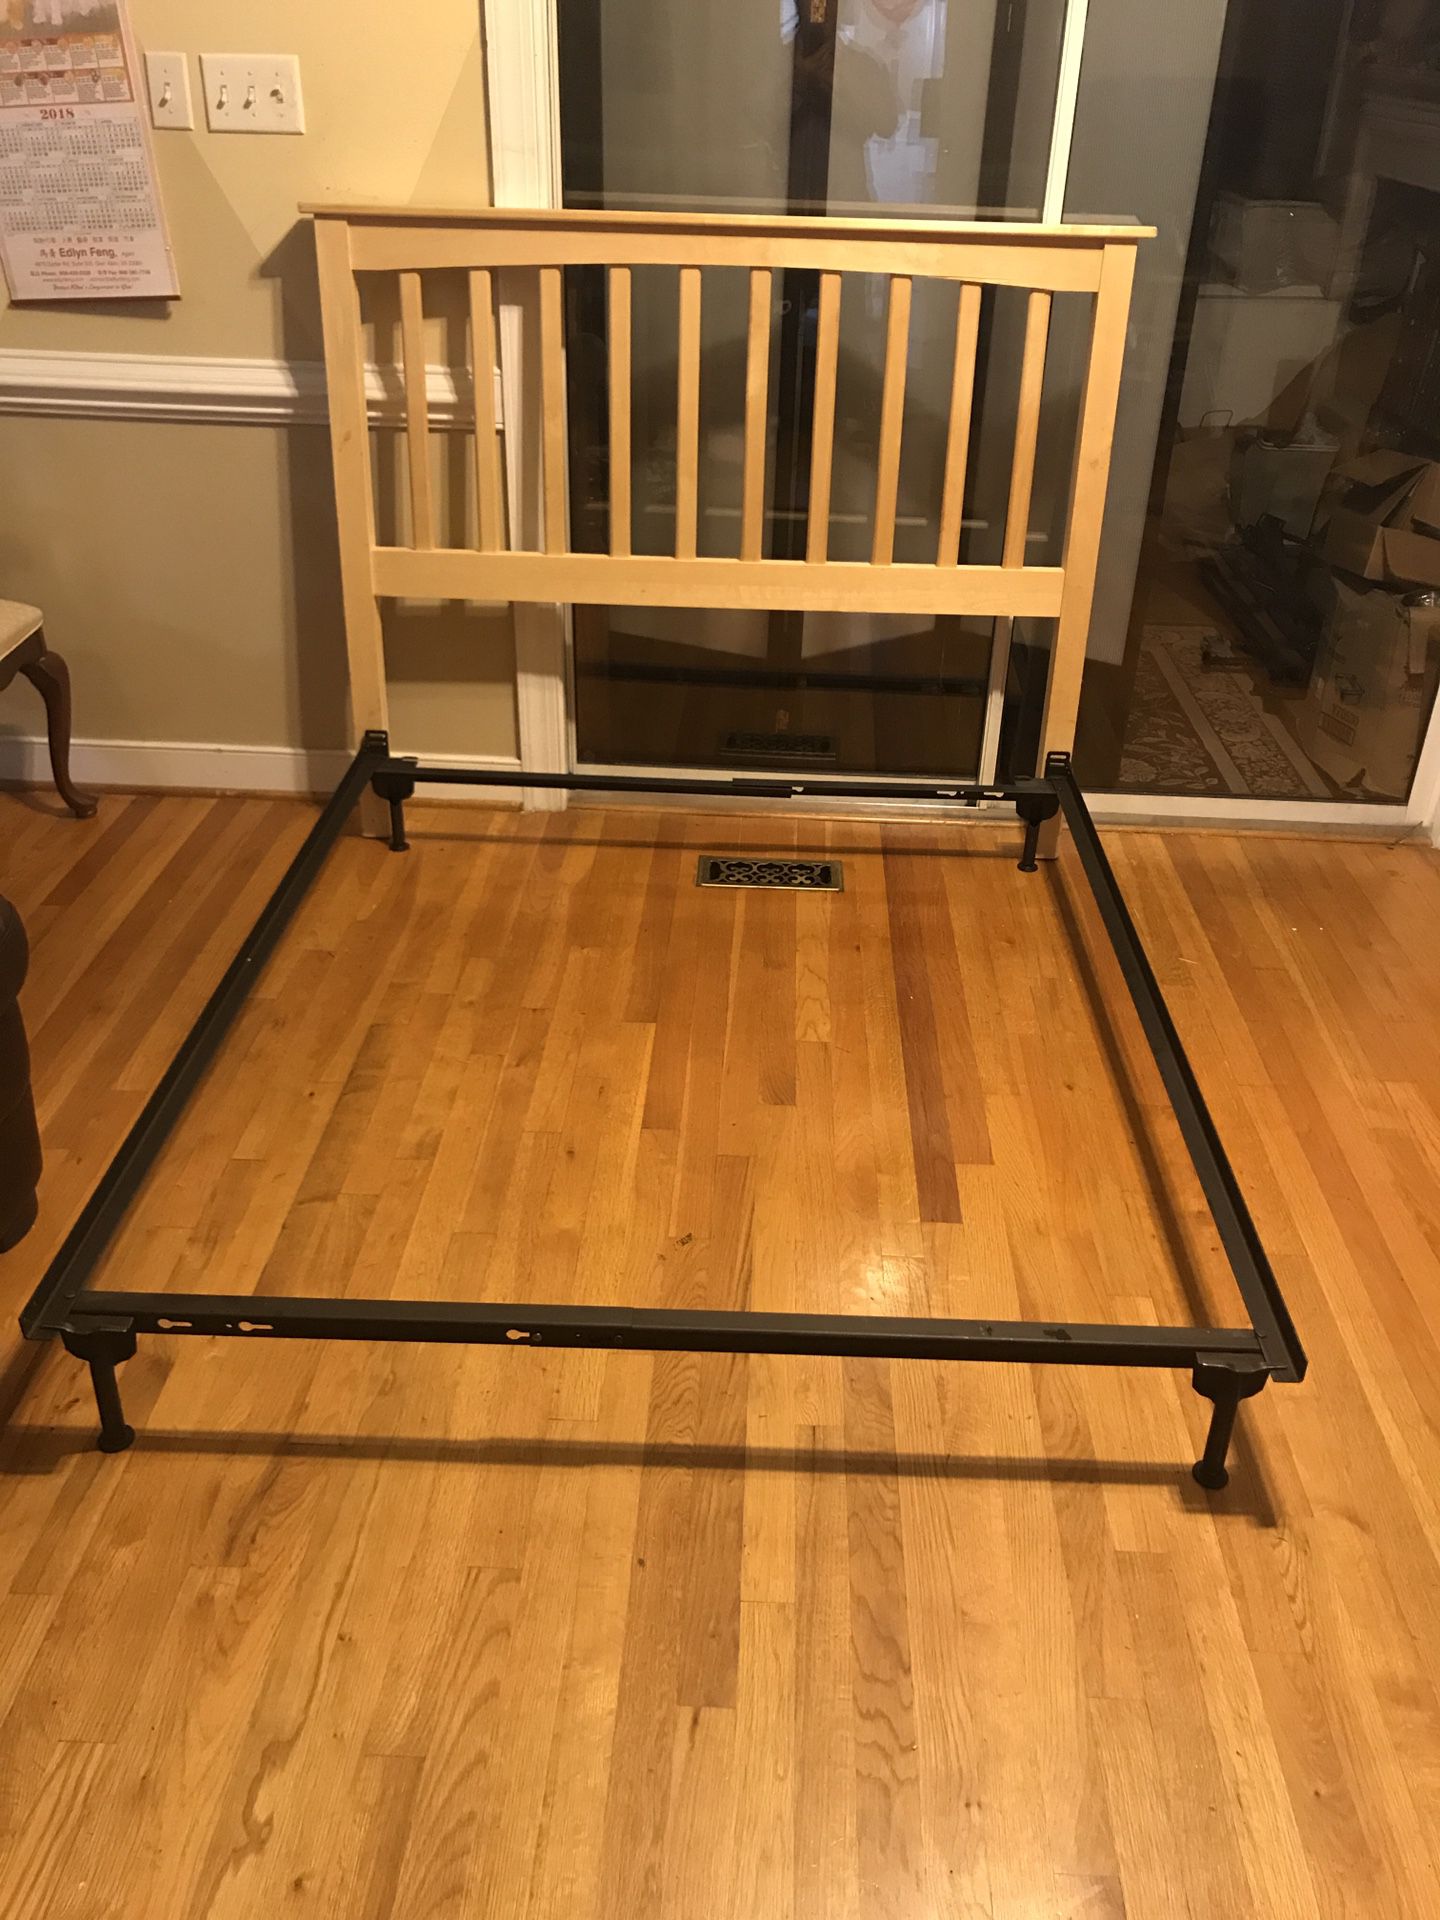 Full size solid wood headboard and metal bed frame